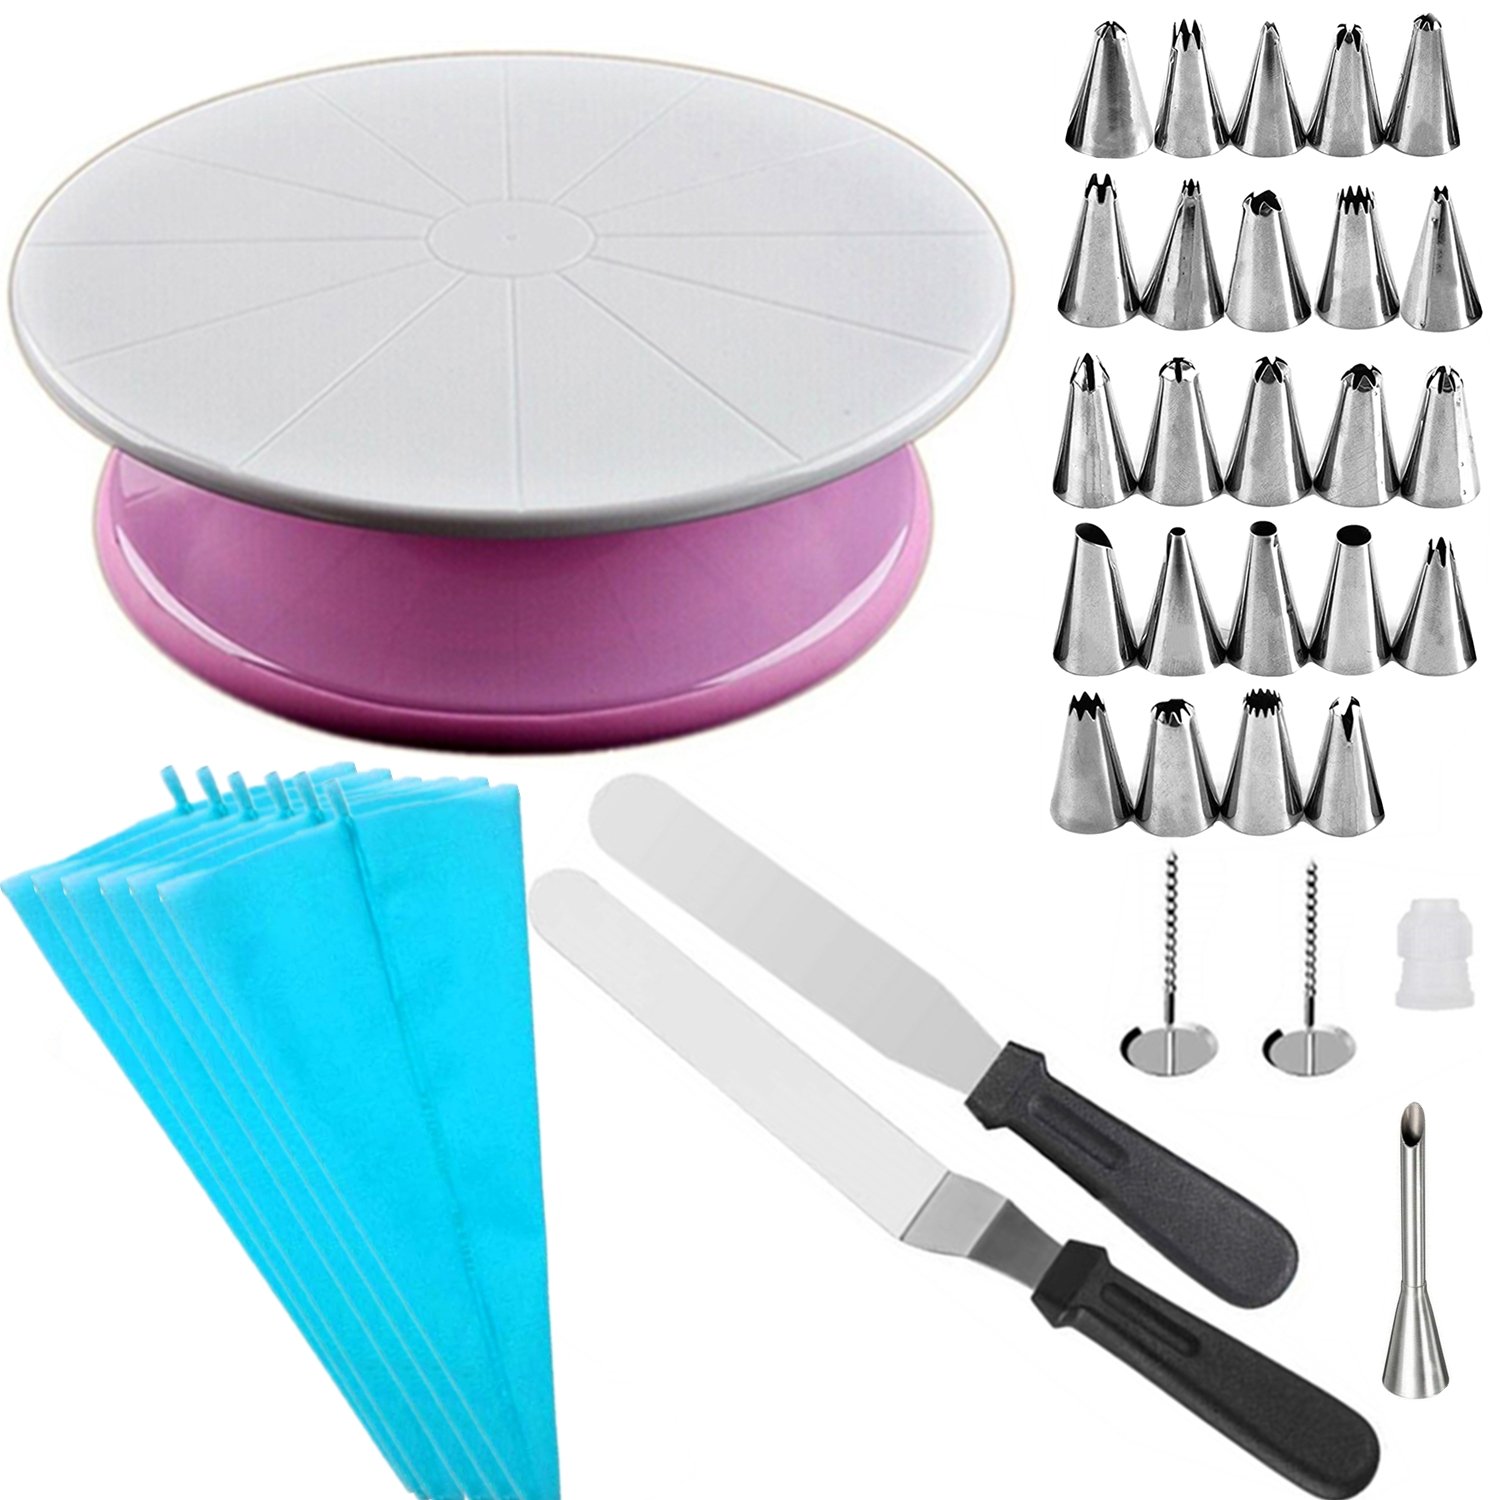 37 in 1 Turntable & Cake Decorating Accessories Set